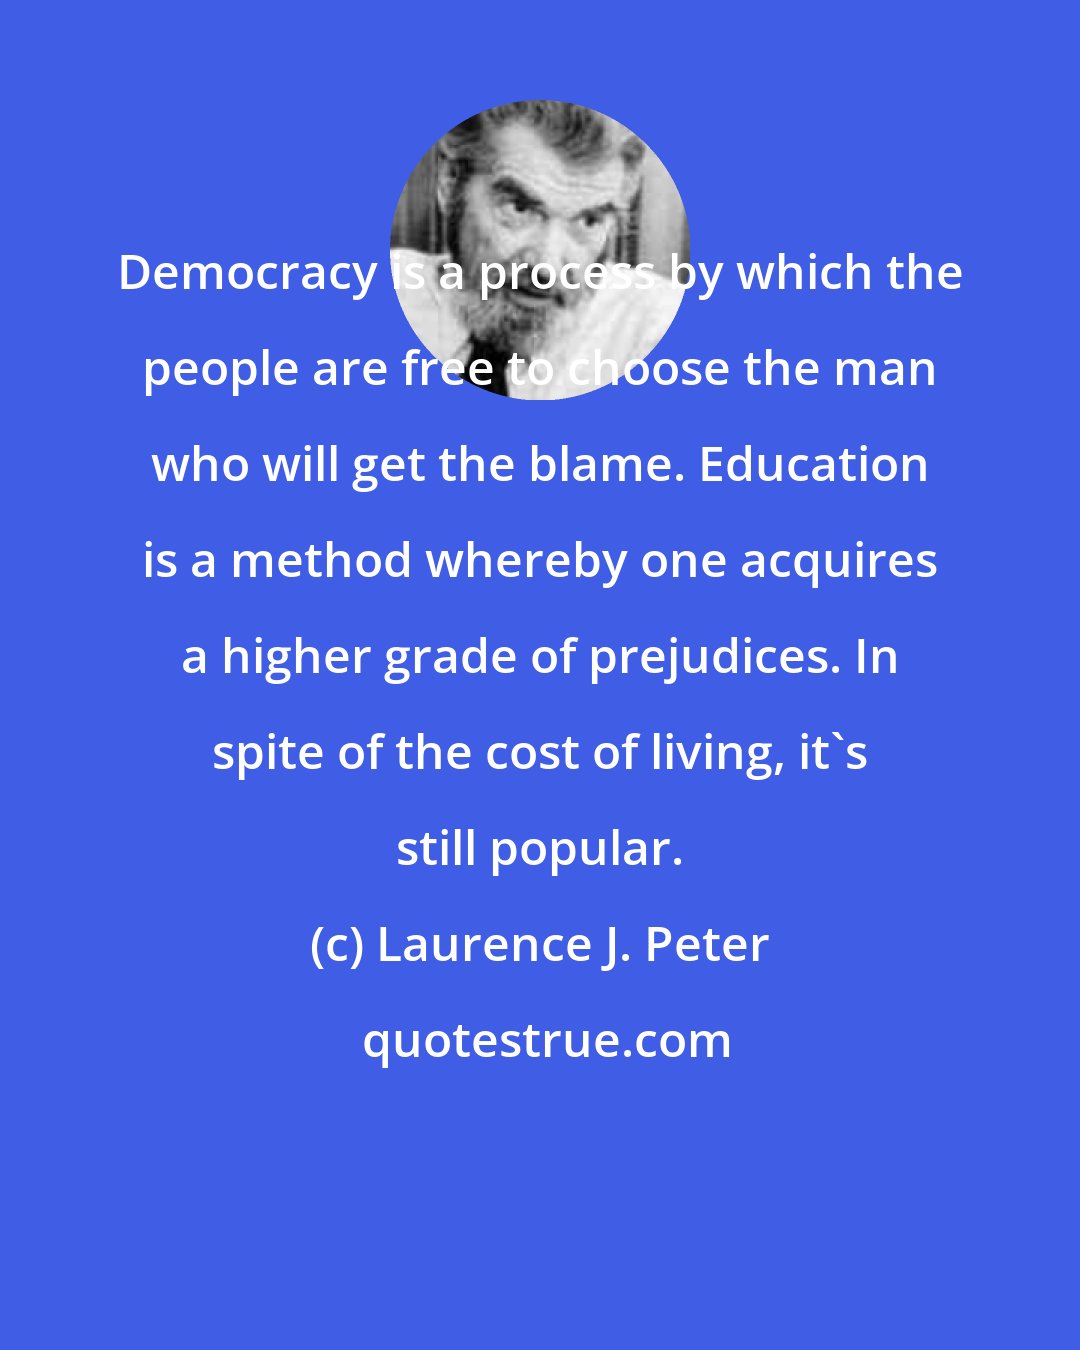 Laurence J. Peter: Democracy is a process by which the people are free to choose the man who will get the blame. Education is a method whereby one acquires a higher grade of prejudices. In spite of the cost of living, it's still popular.